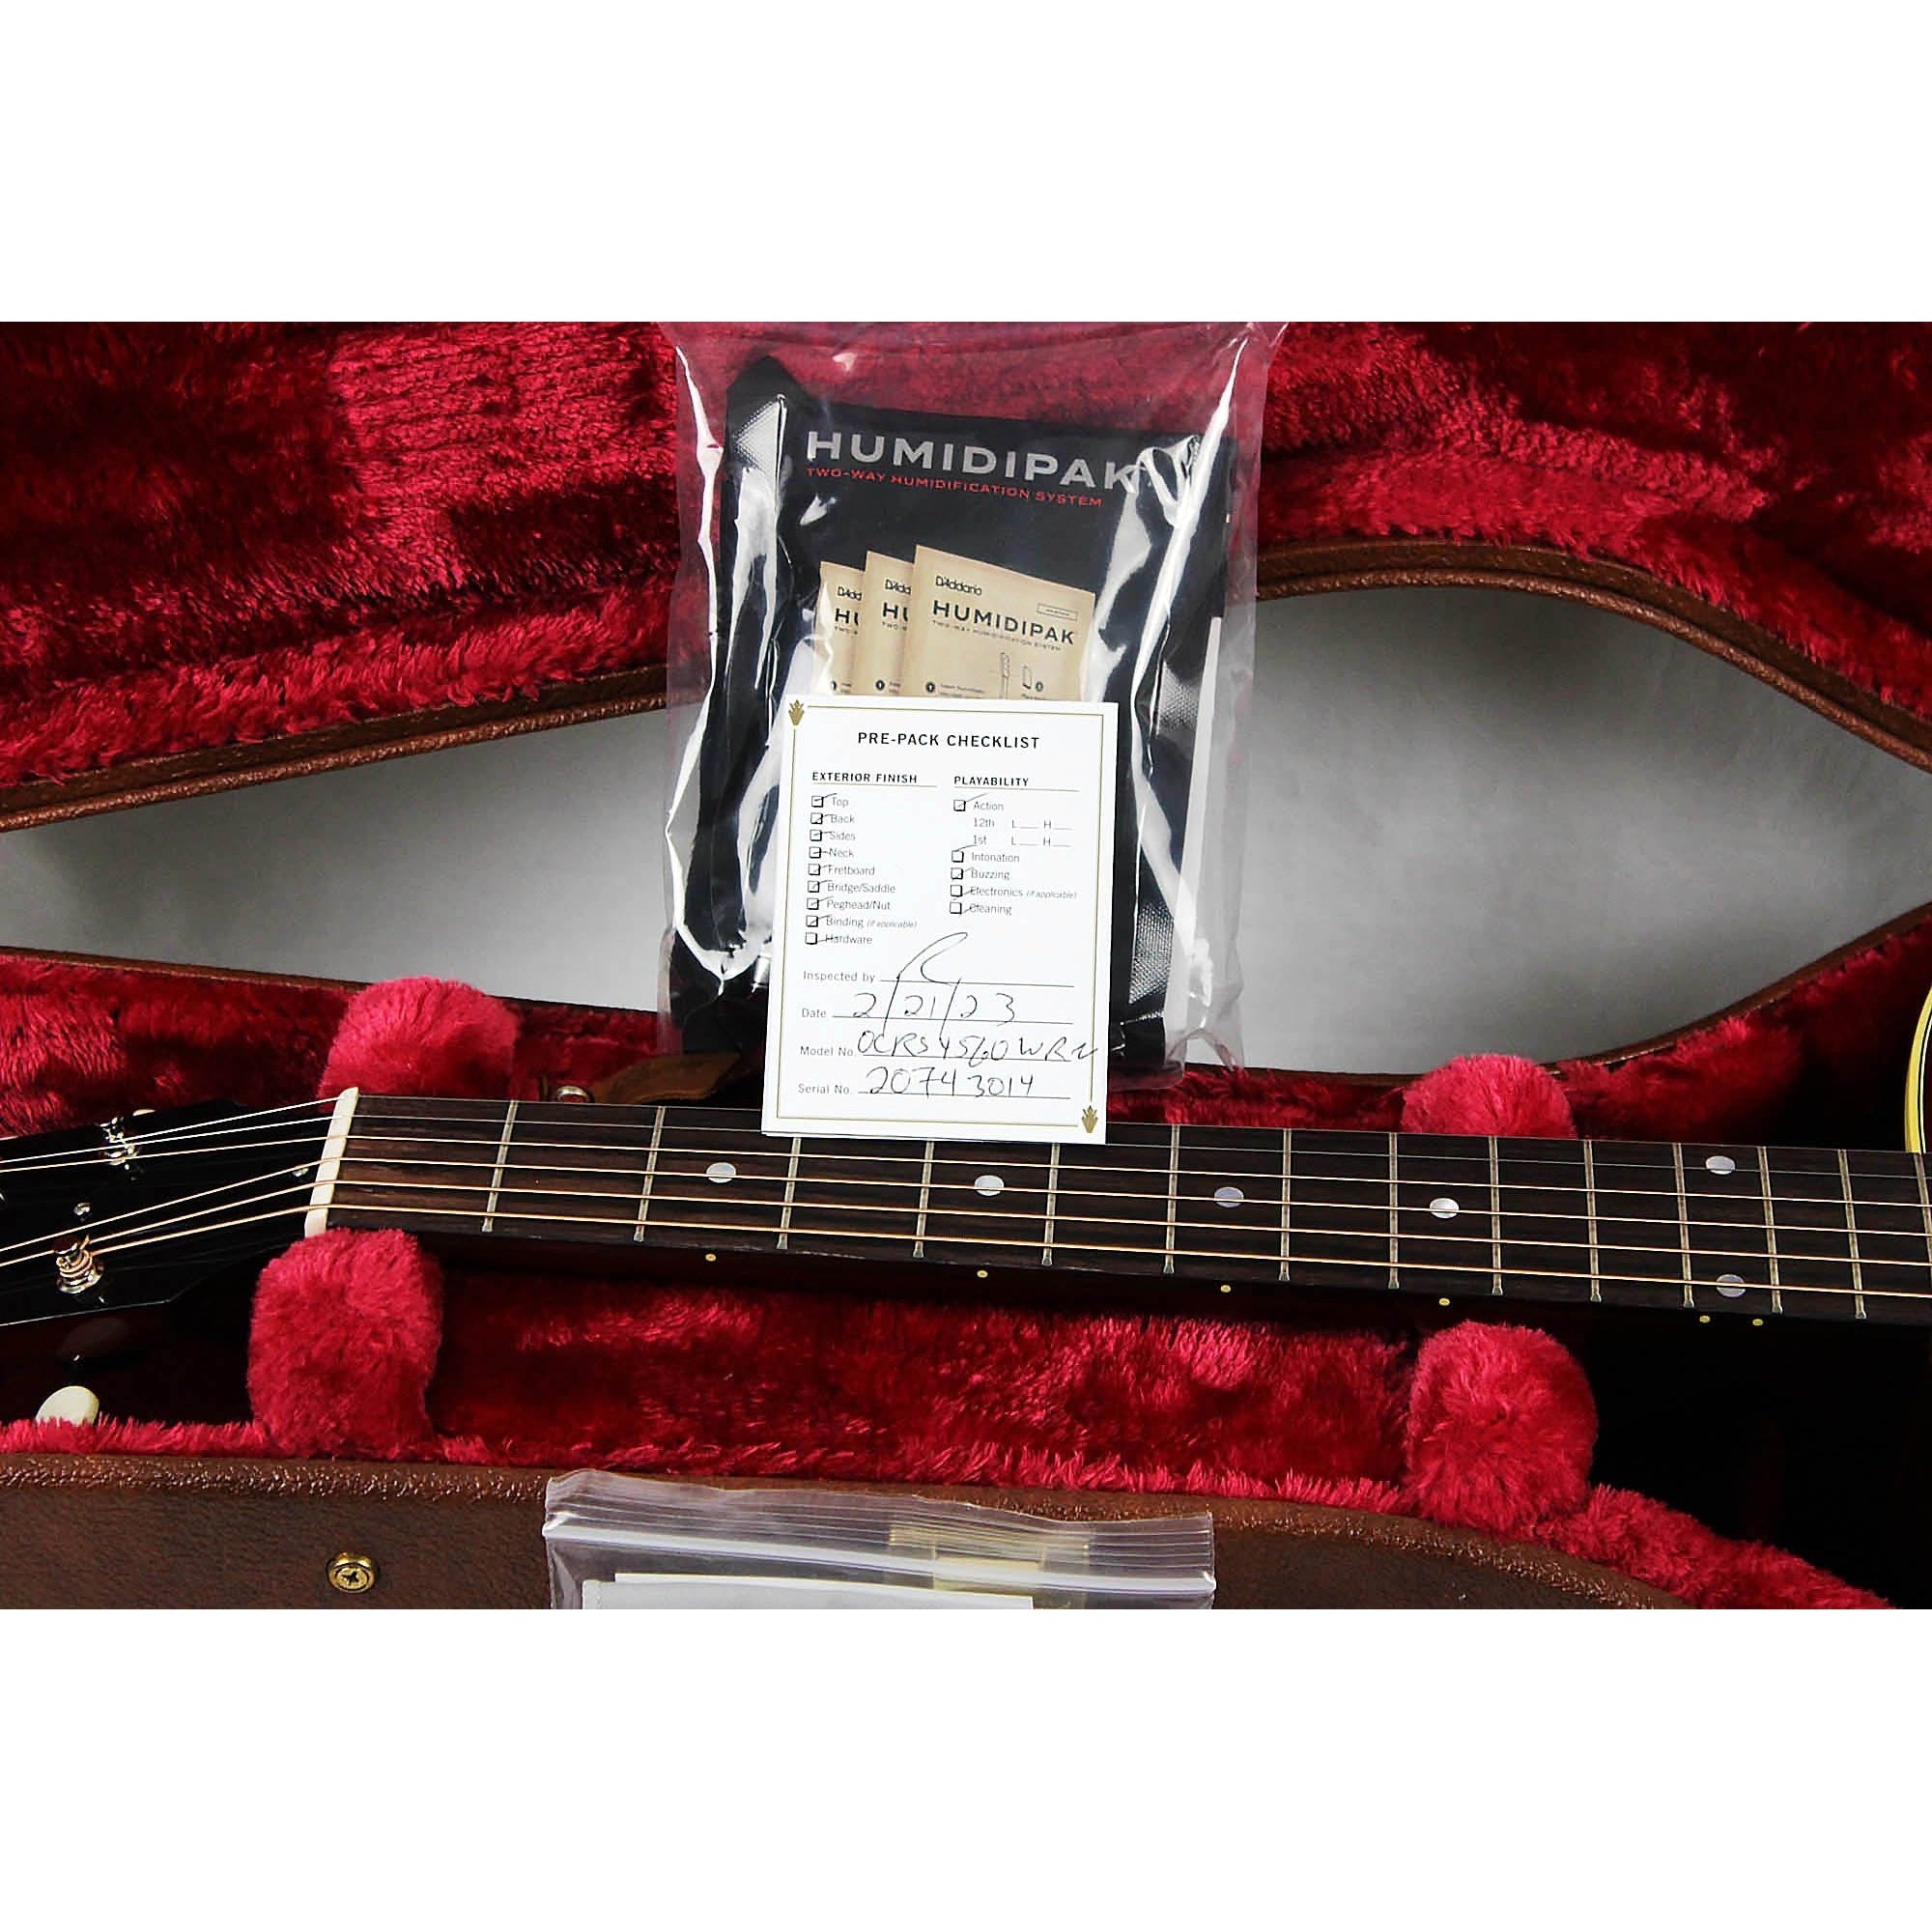 Gibson Acoustic 60's J-45 Original - Wine Red | Leitz Music Exclusive